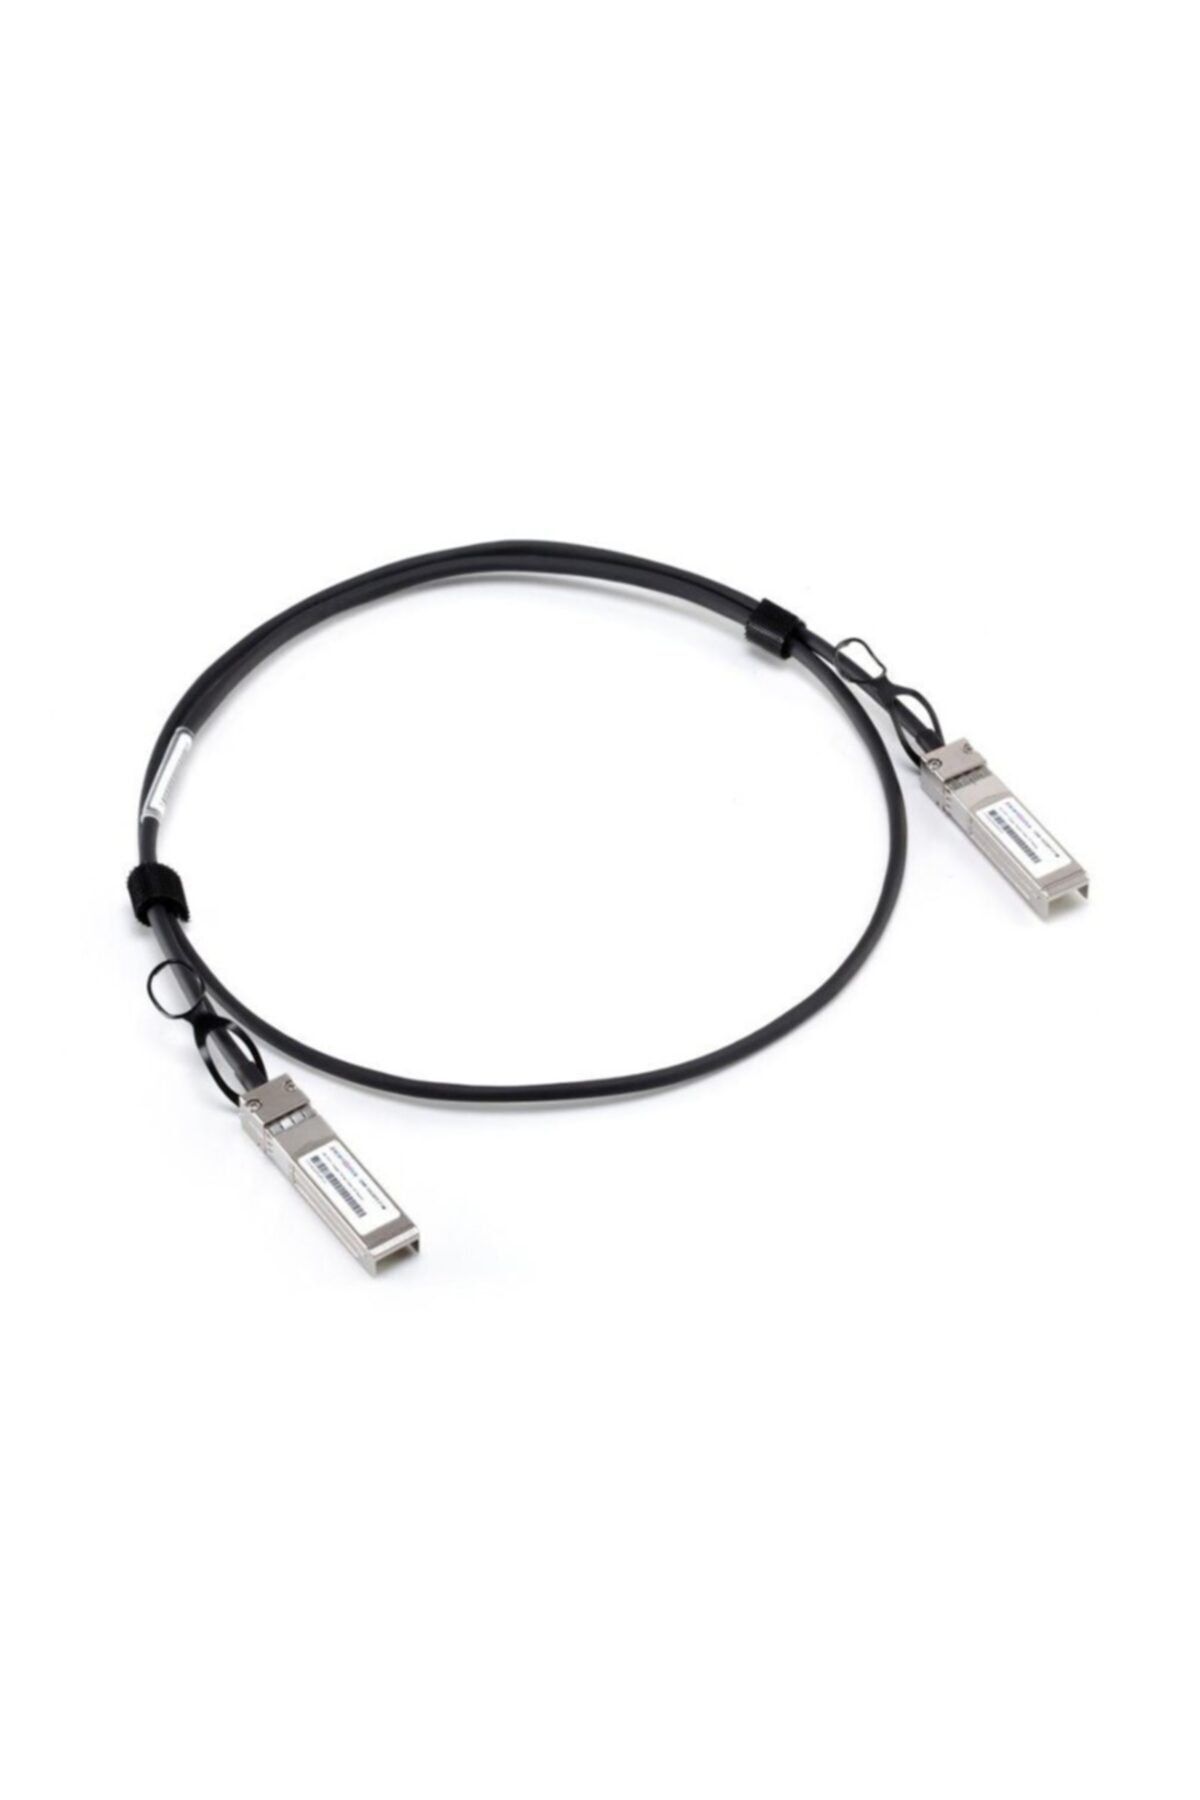 Huawei Sfp+ 10g High Speed Direct-attach Cables 1m Sfp+20m Cc2p0.254b(s) Sfp+20m Used Indoor